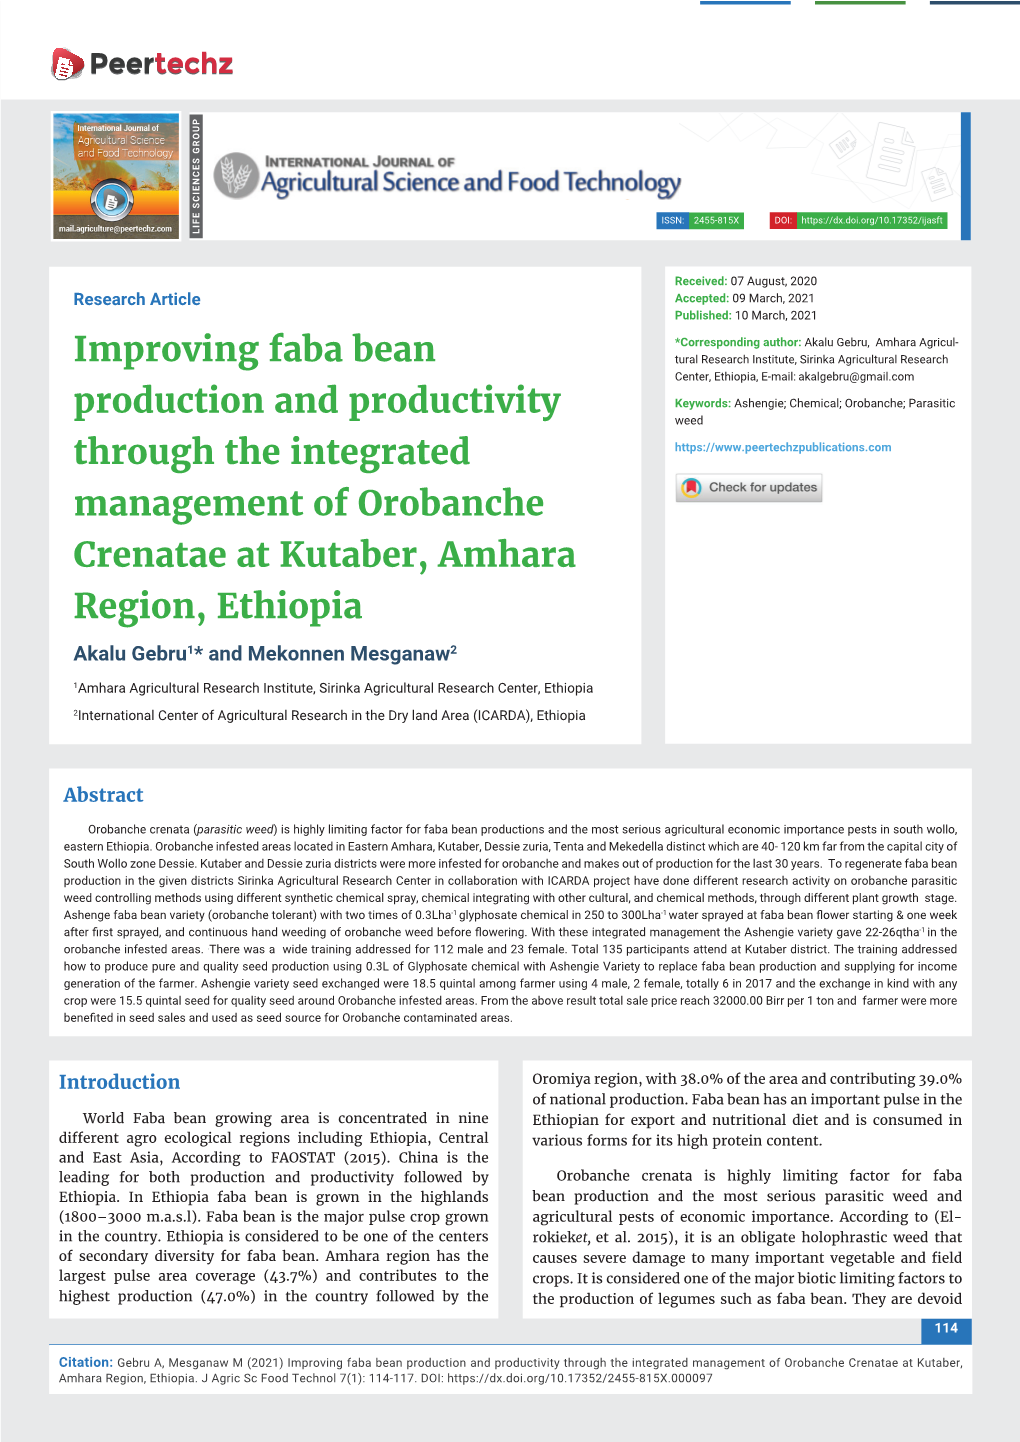 Improving Faba Bean Production and Productivity Through the Integrated Management of Orobanche Crenatae at Kutaber, Amhara Region, Ethiopia